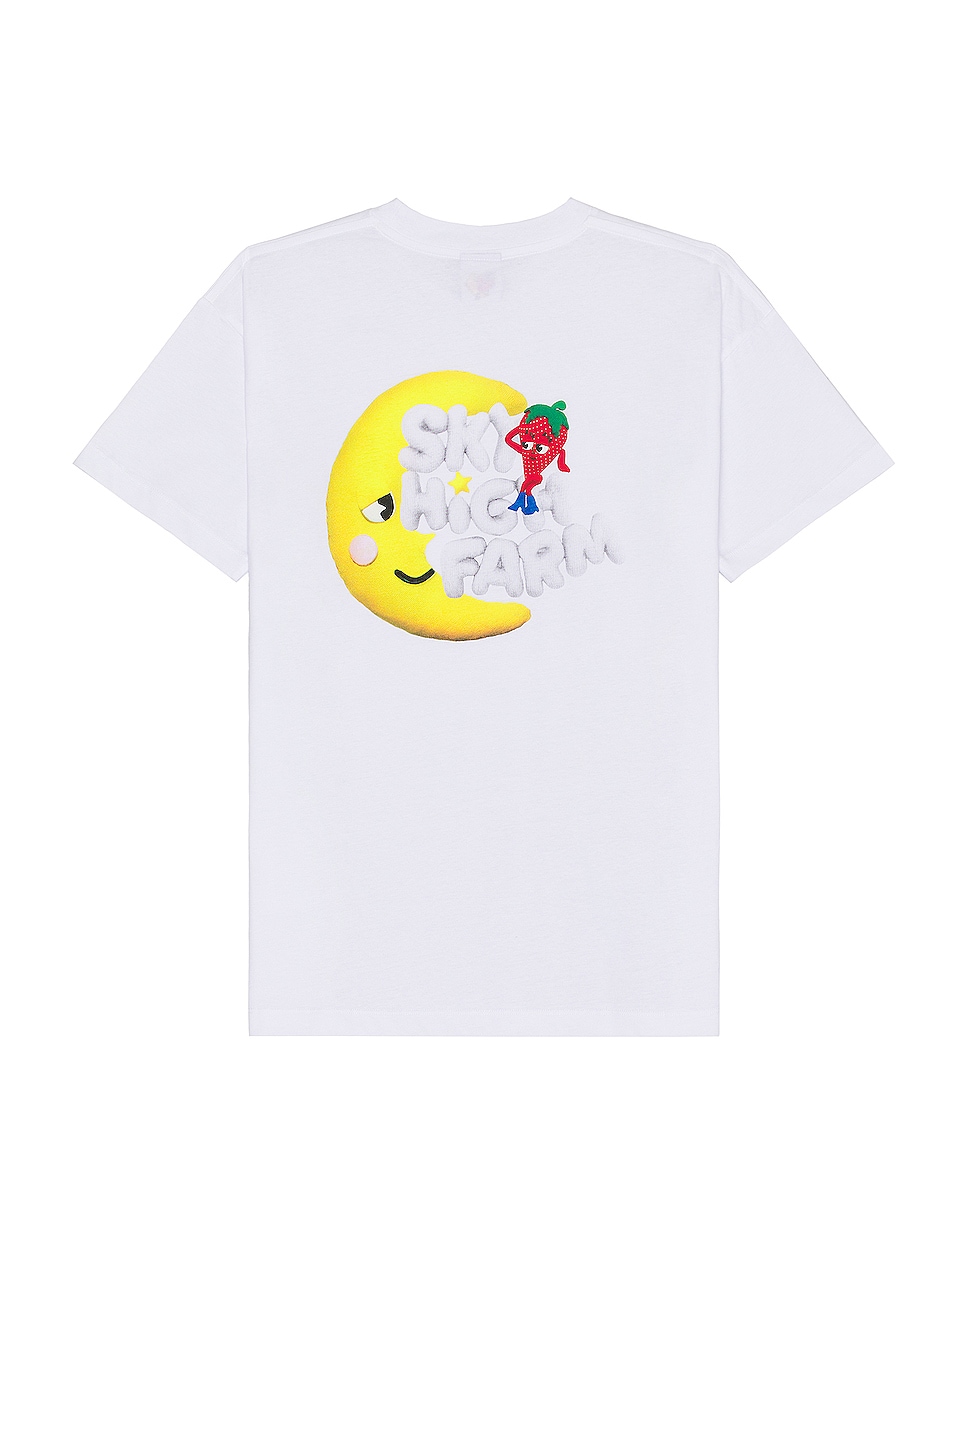 Image 1 of Sky High Farm Workwear Unisex Perennial Shana Graphic T-shirt Knit in WHITE